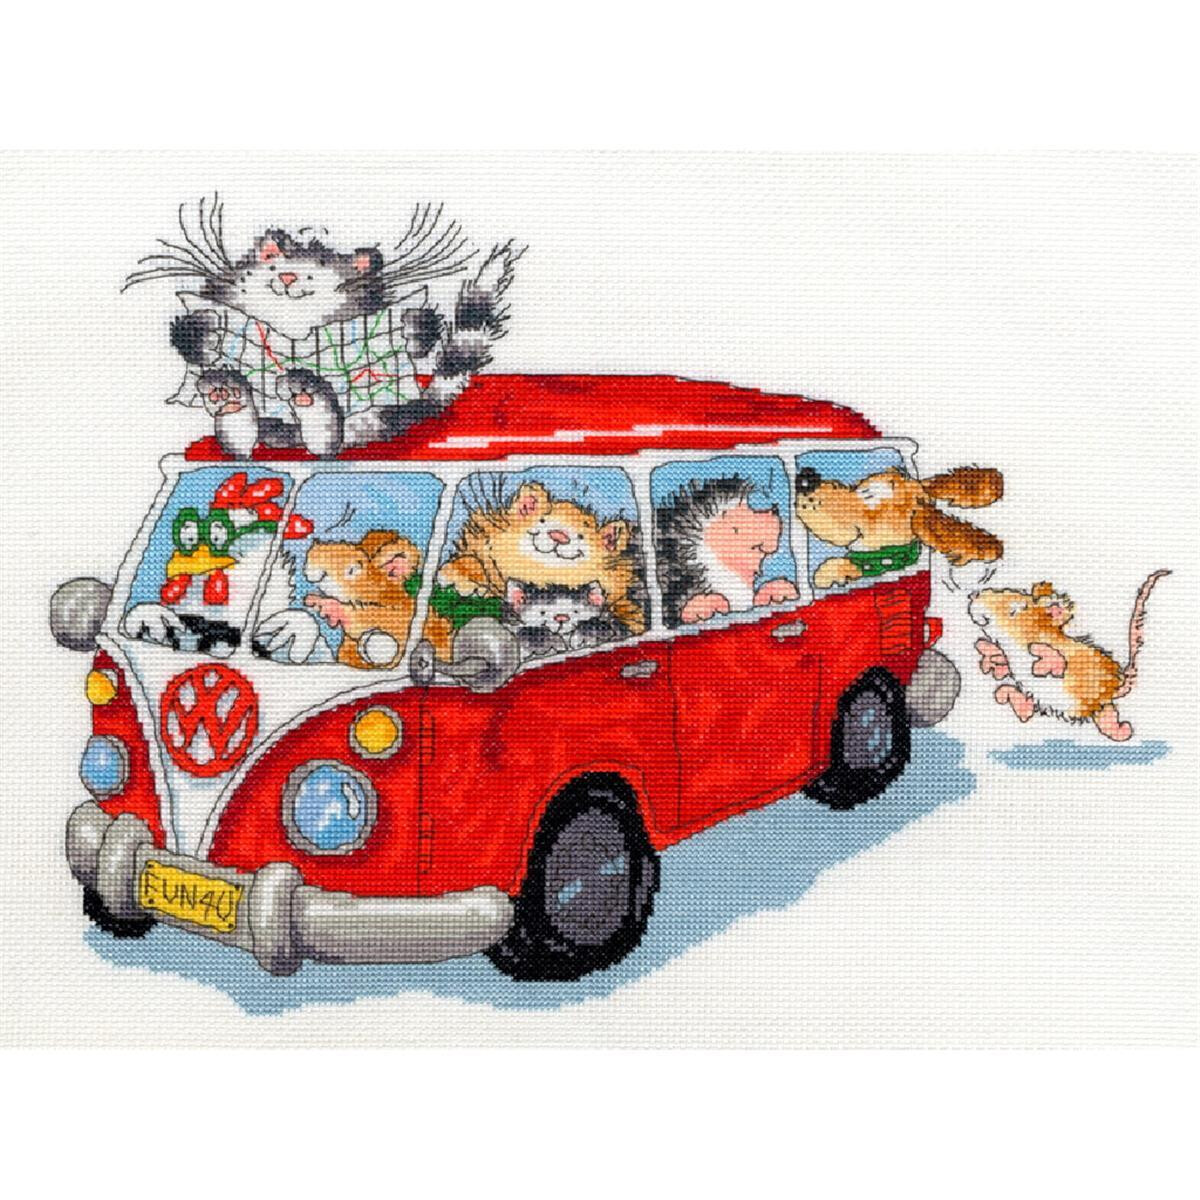 A colorful cartoon picture shows a red VW bus full of...